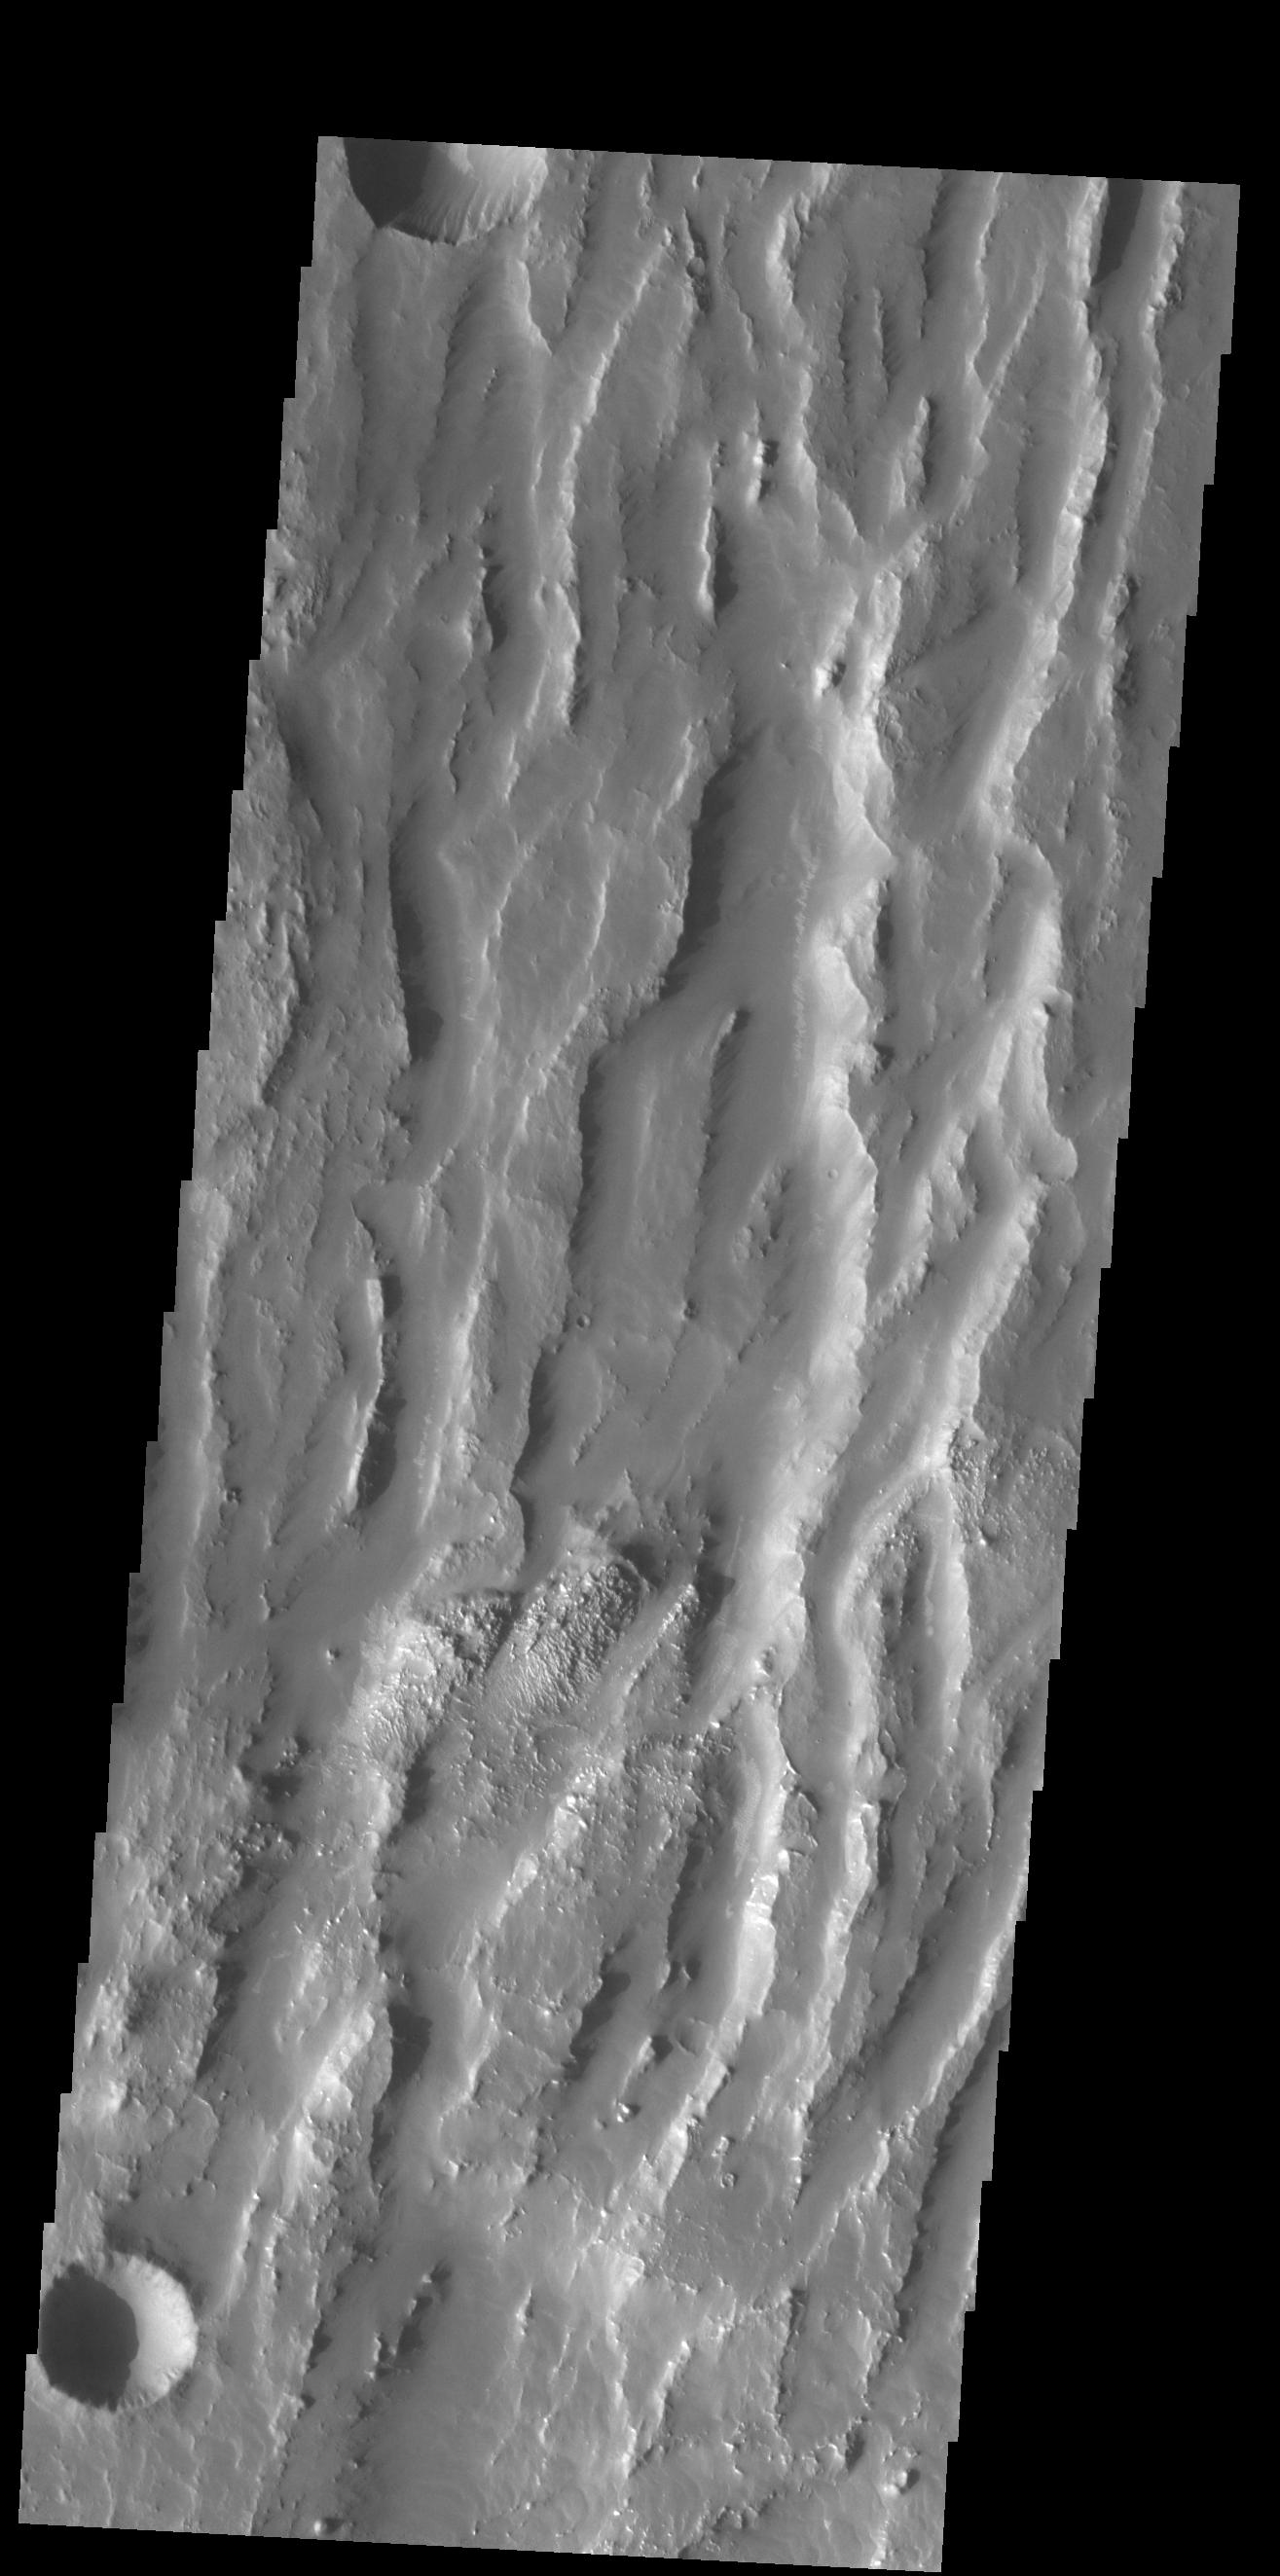 This image from NASAs Mars Odyssey shows Claritas Fossae, a graben filled highland located between the lava plains of Daedalia Planum and Solis Planum.